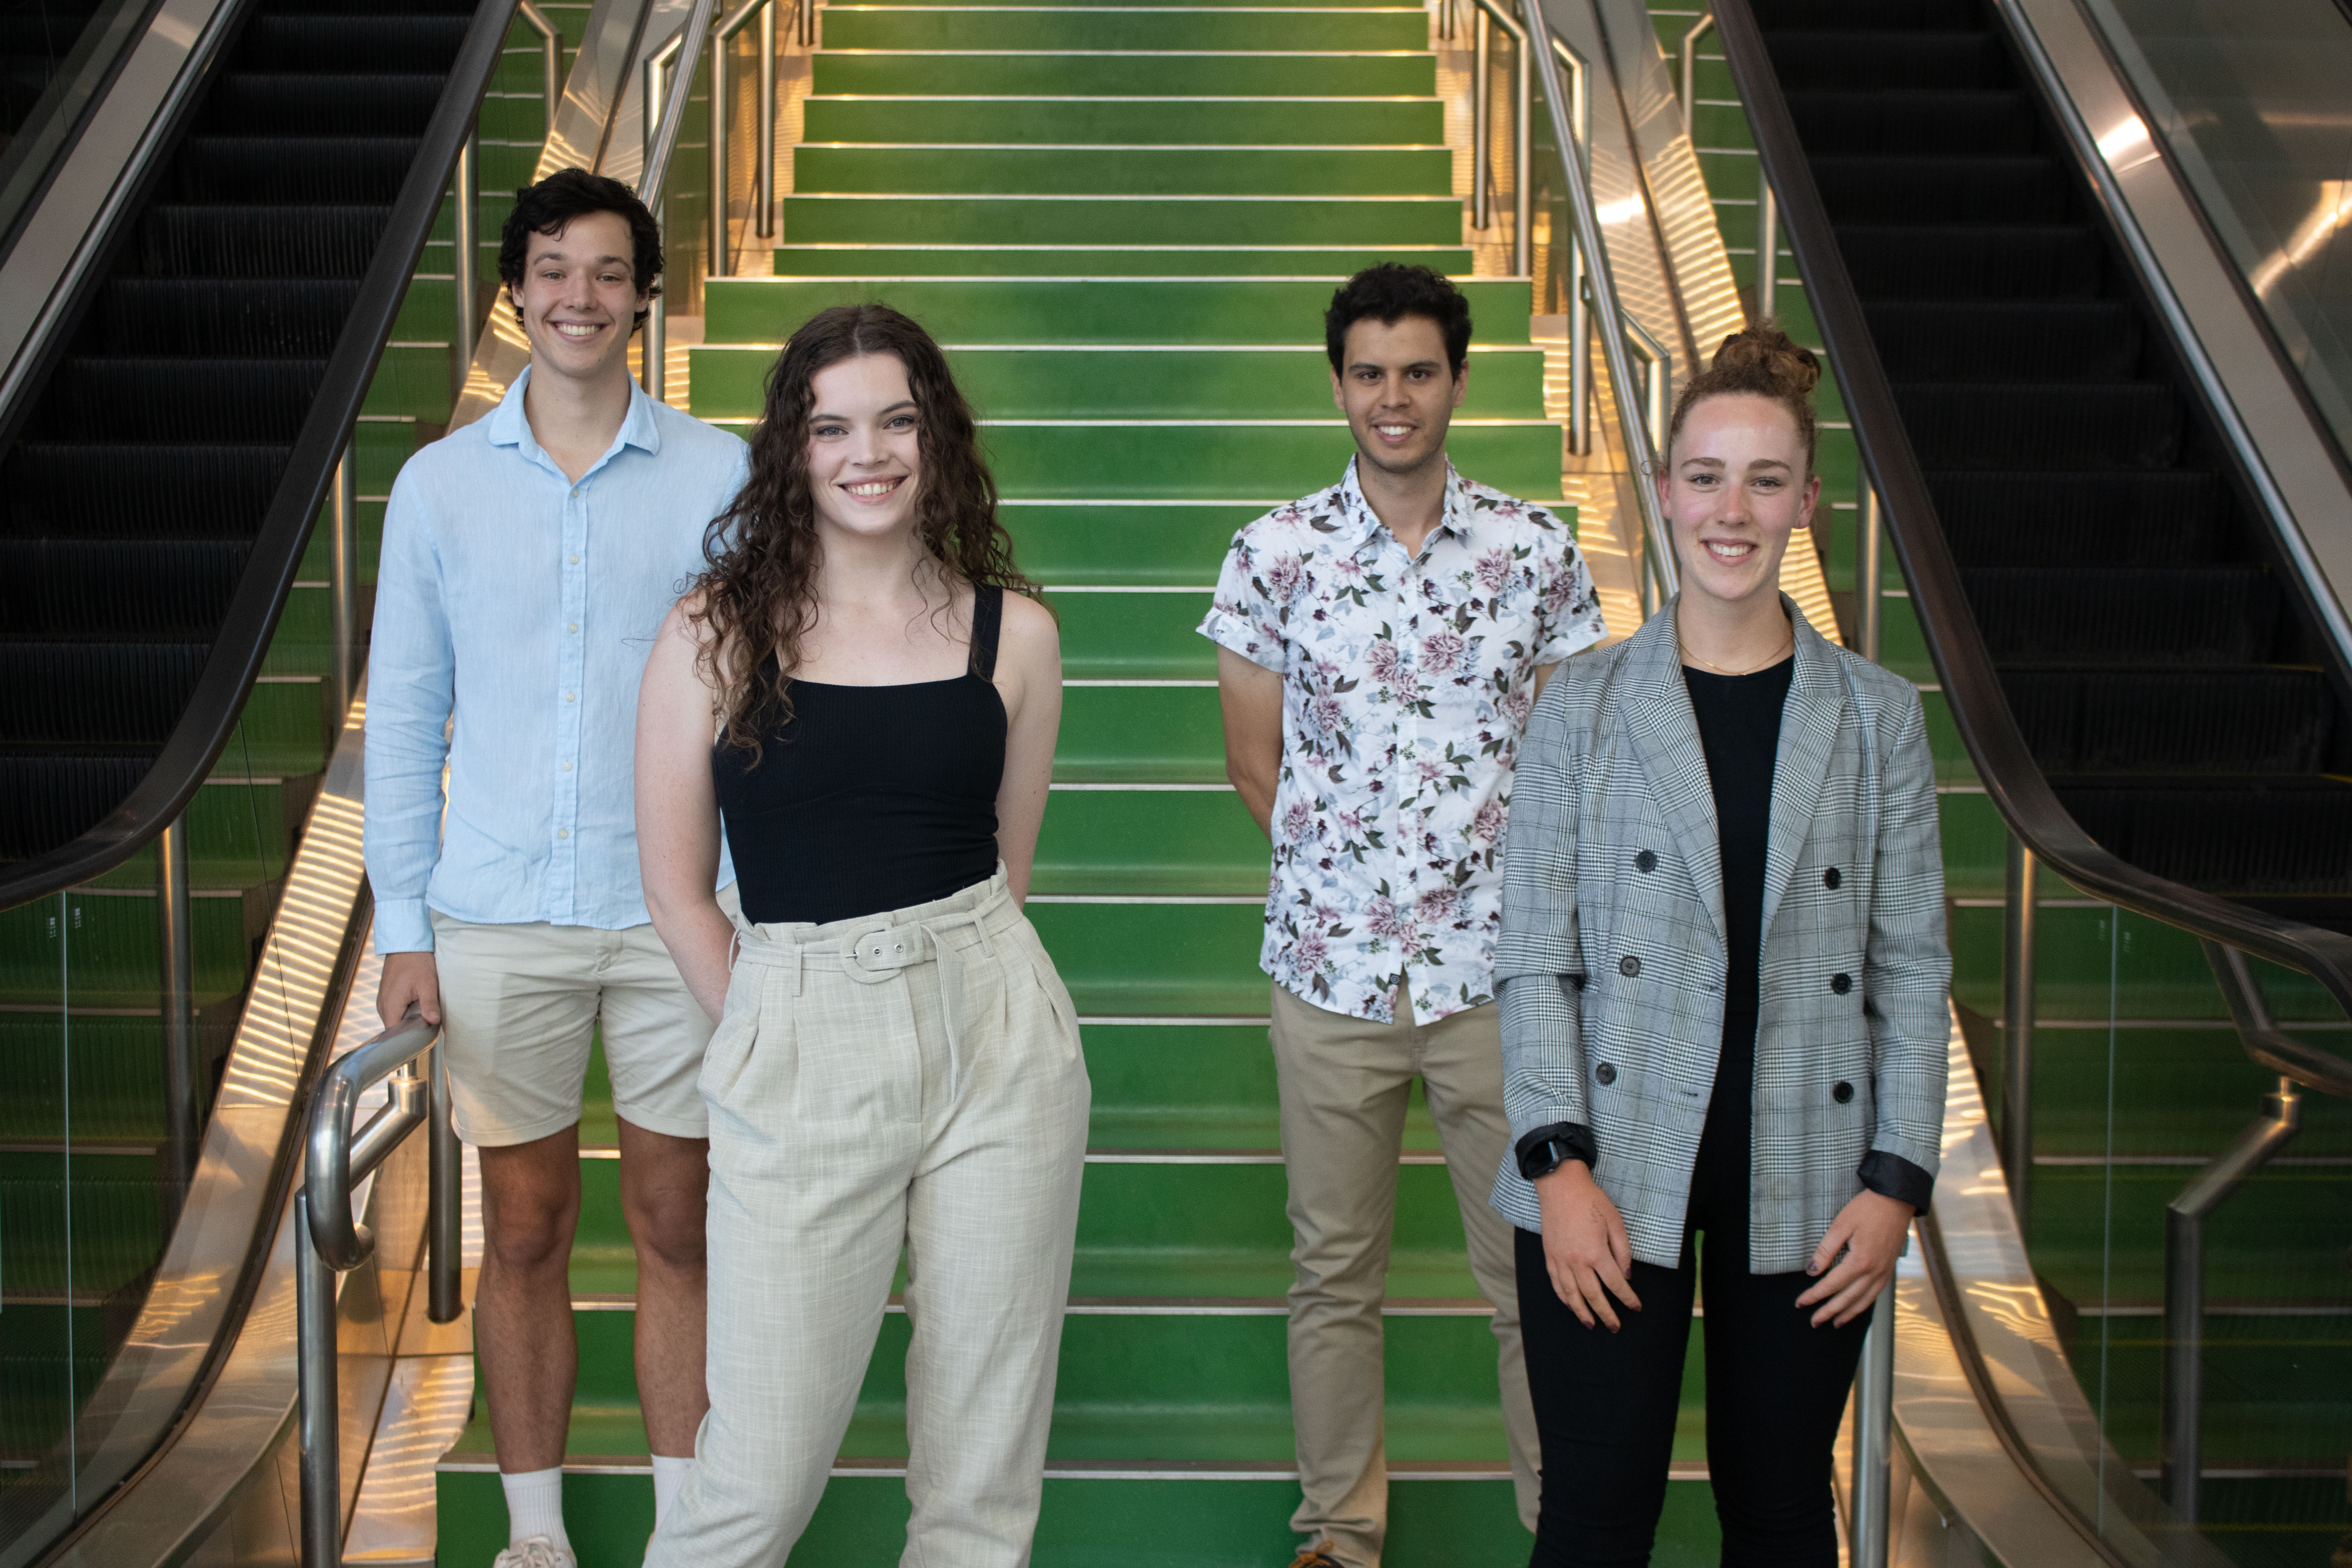 The four recipients stand, smiling, in front of a green set of stairs at Swinburne's AMDC building